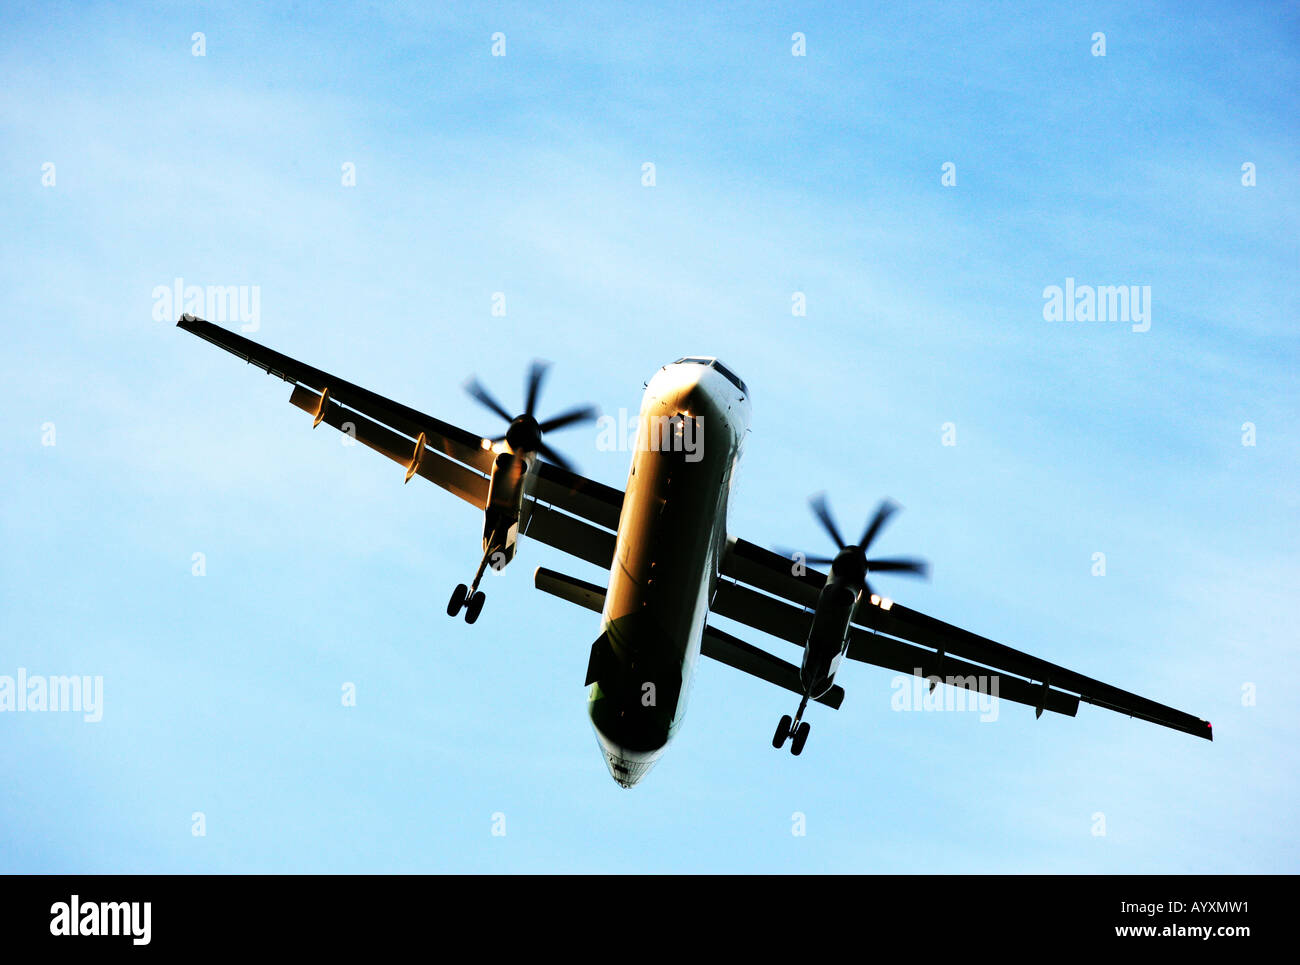 A landscape format image of a twin propeller aircraft with undercarriage down on final approach to land. Stock Photo